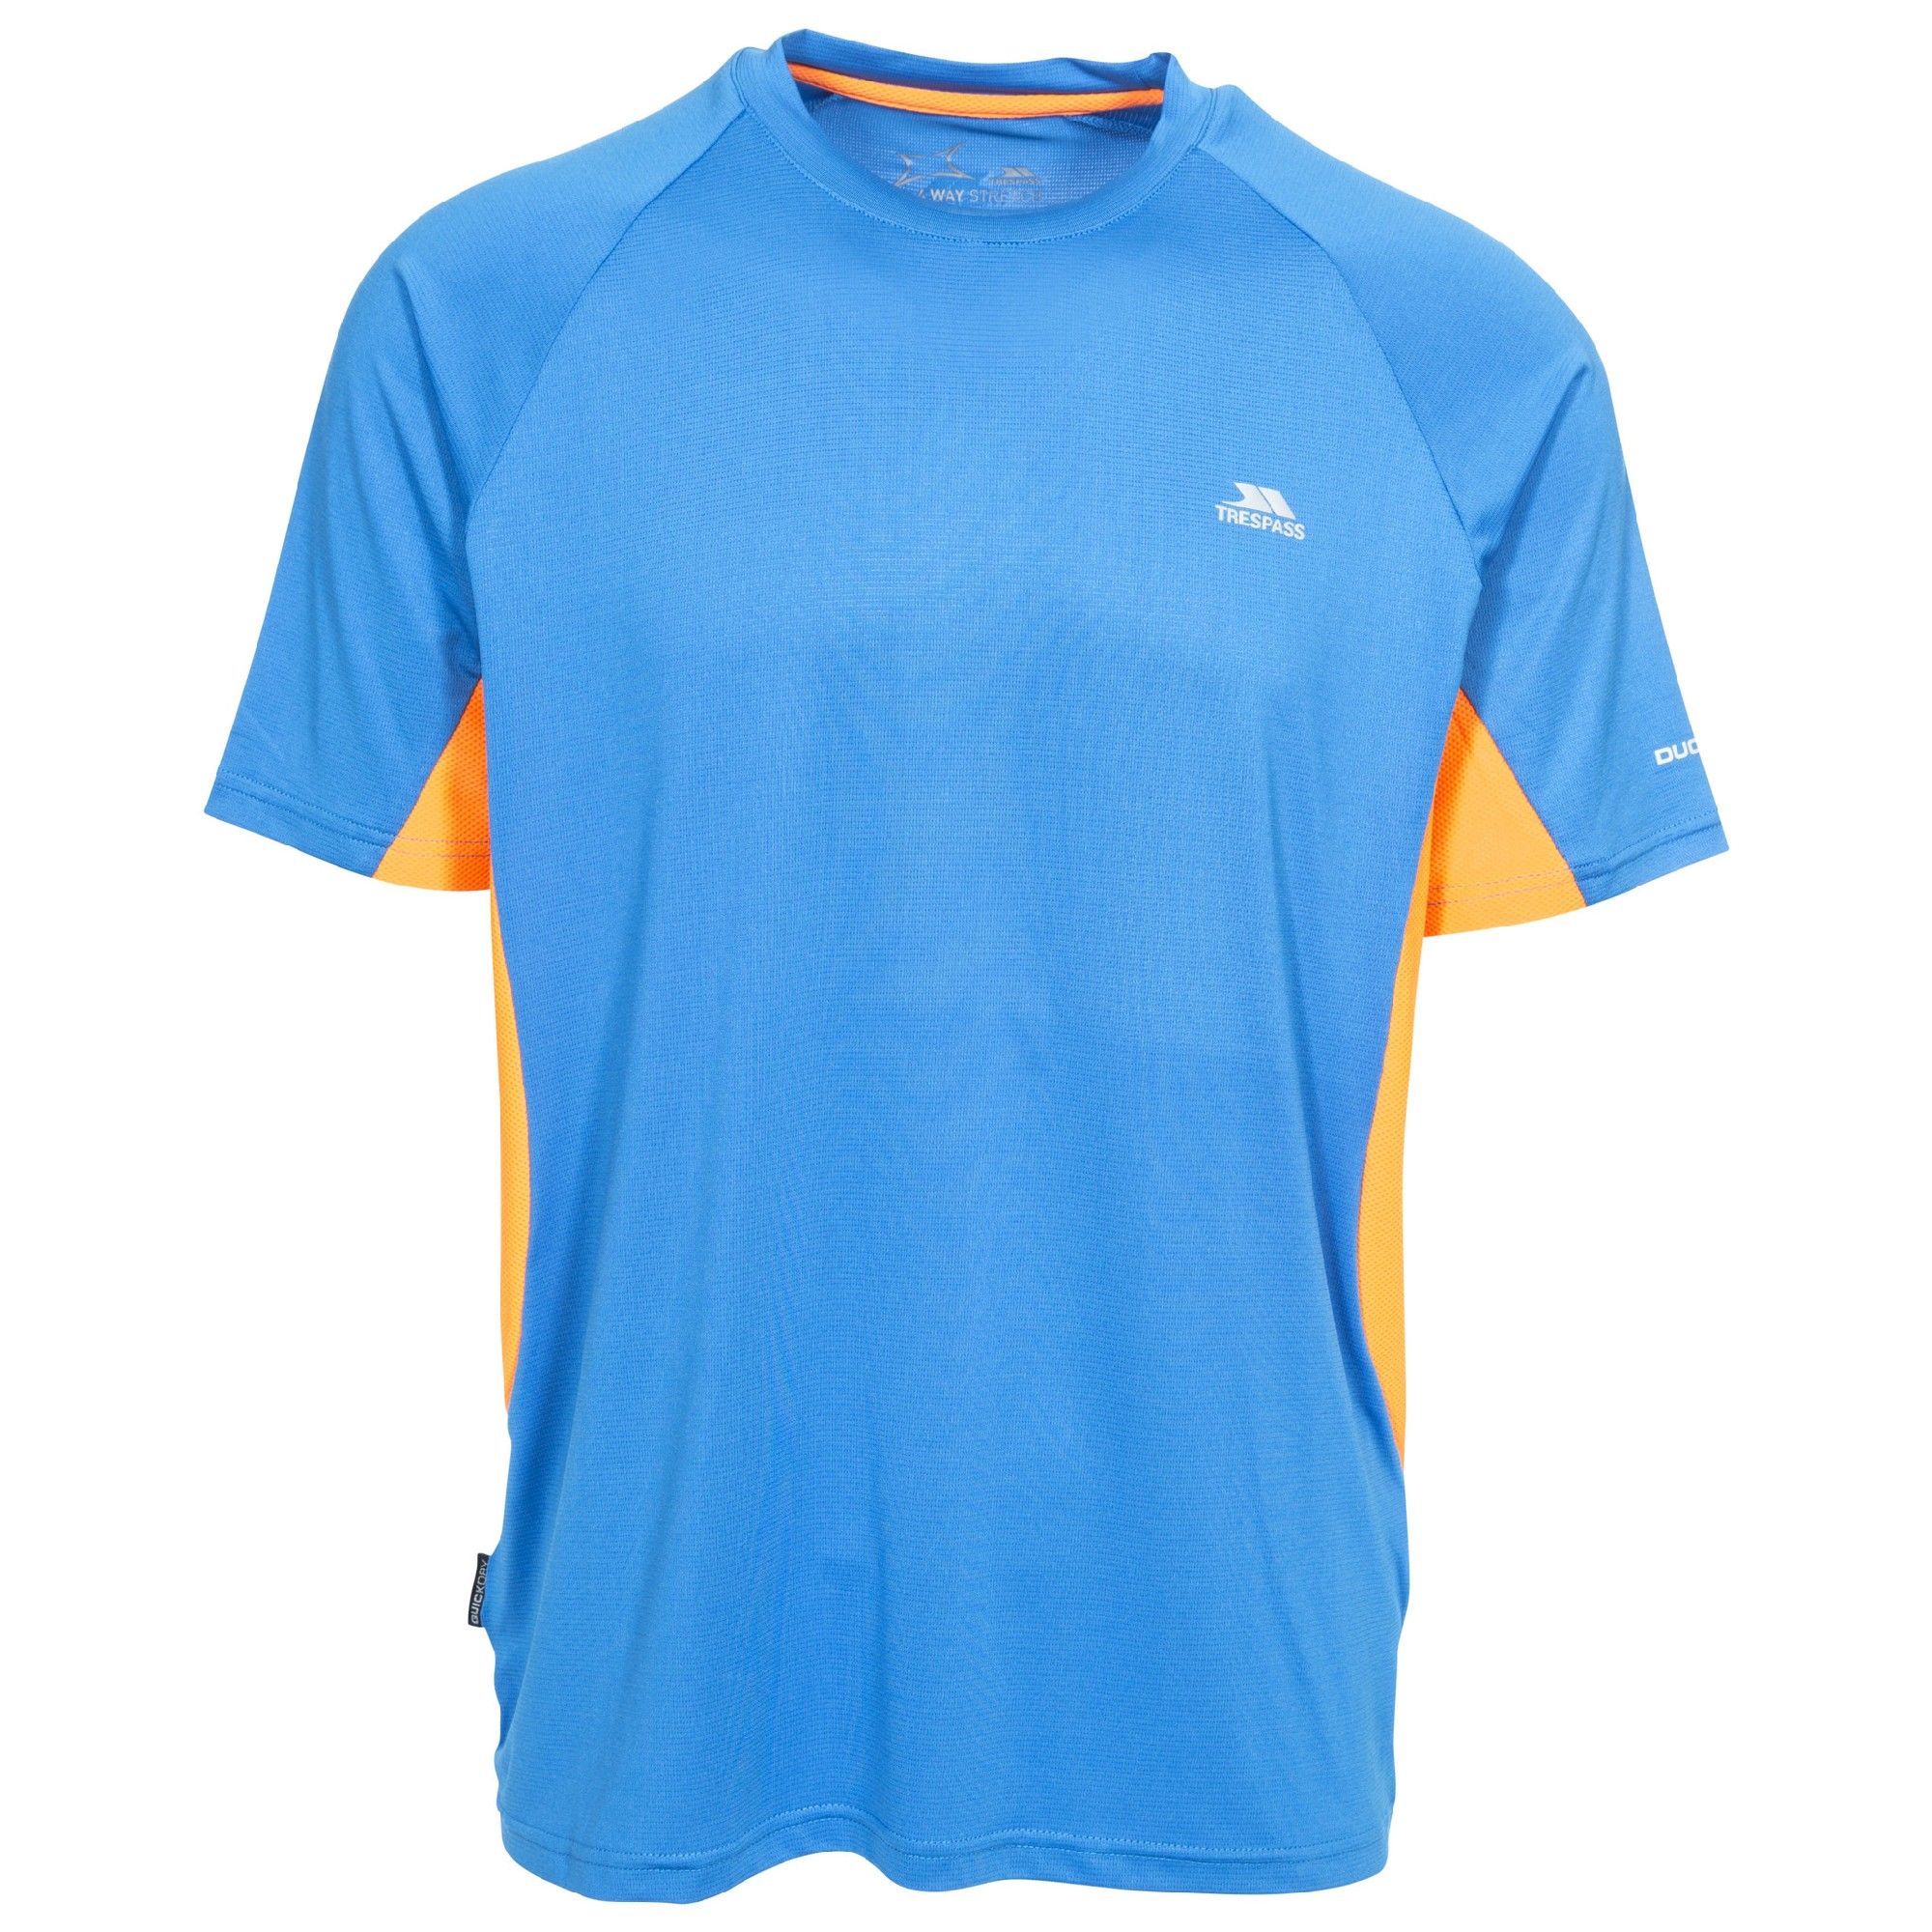 Short sleeve. Round neck. Contrast mesh panels. Reflective prints. 4 way stretch. Wicking. Quick dry. Main: 92% Polyester/8% Elastane, Mesh: 100% Polyester. Trespass Mens Chest Sizing (approx): S - 35-37in/89-94cm, M - 38-40in/96.5-101.5cm, L - 41-43in/104-109cm, XL - 44-46in/111.5-117cm, XXL - 46-48in/117-122cm, 3XL - 48-50in/122-127cm.